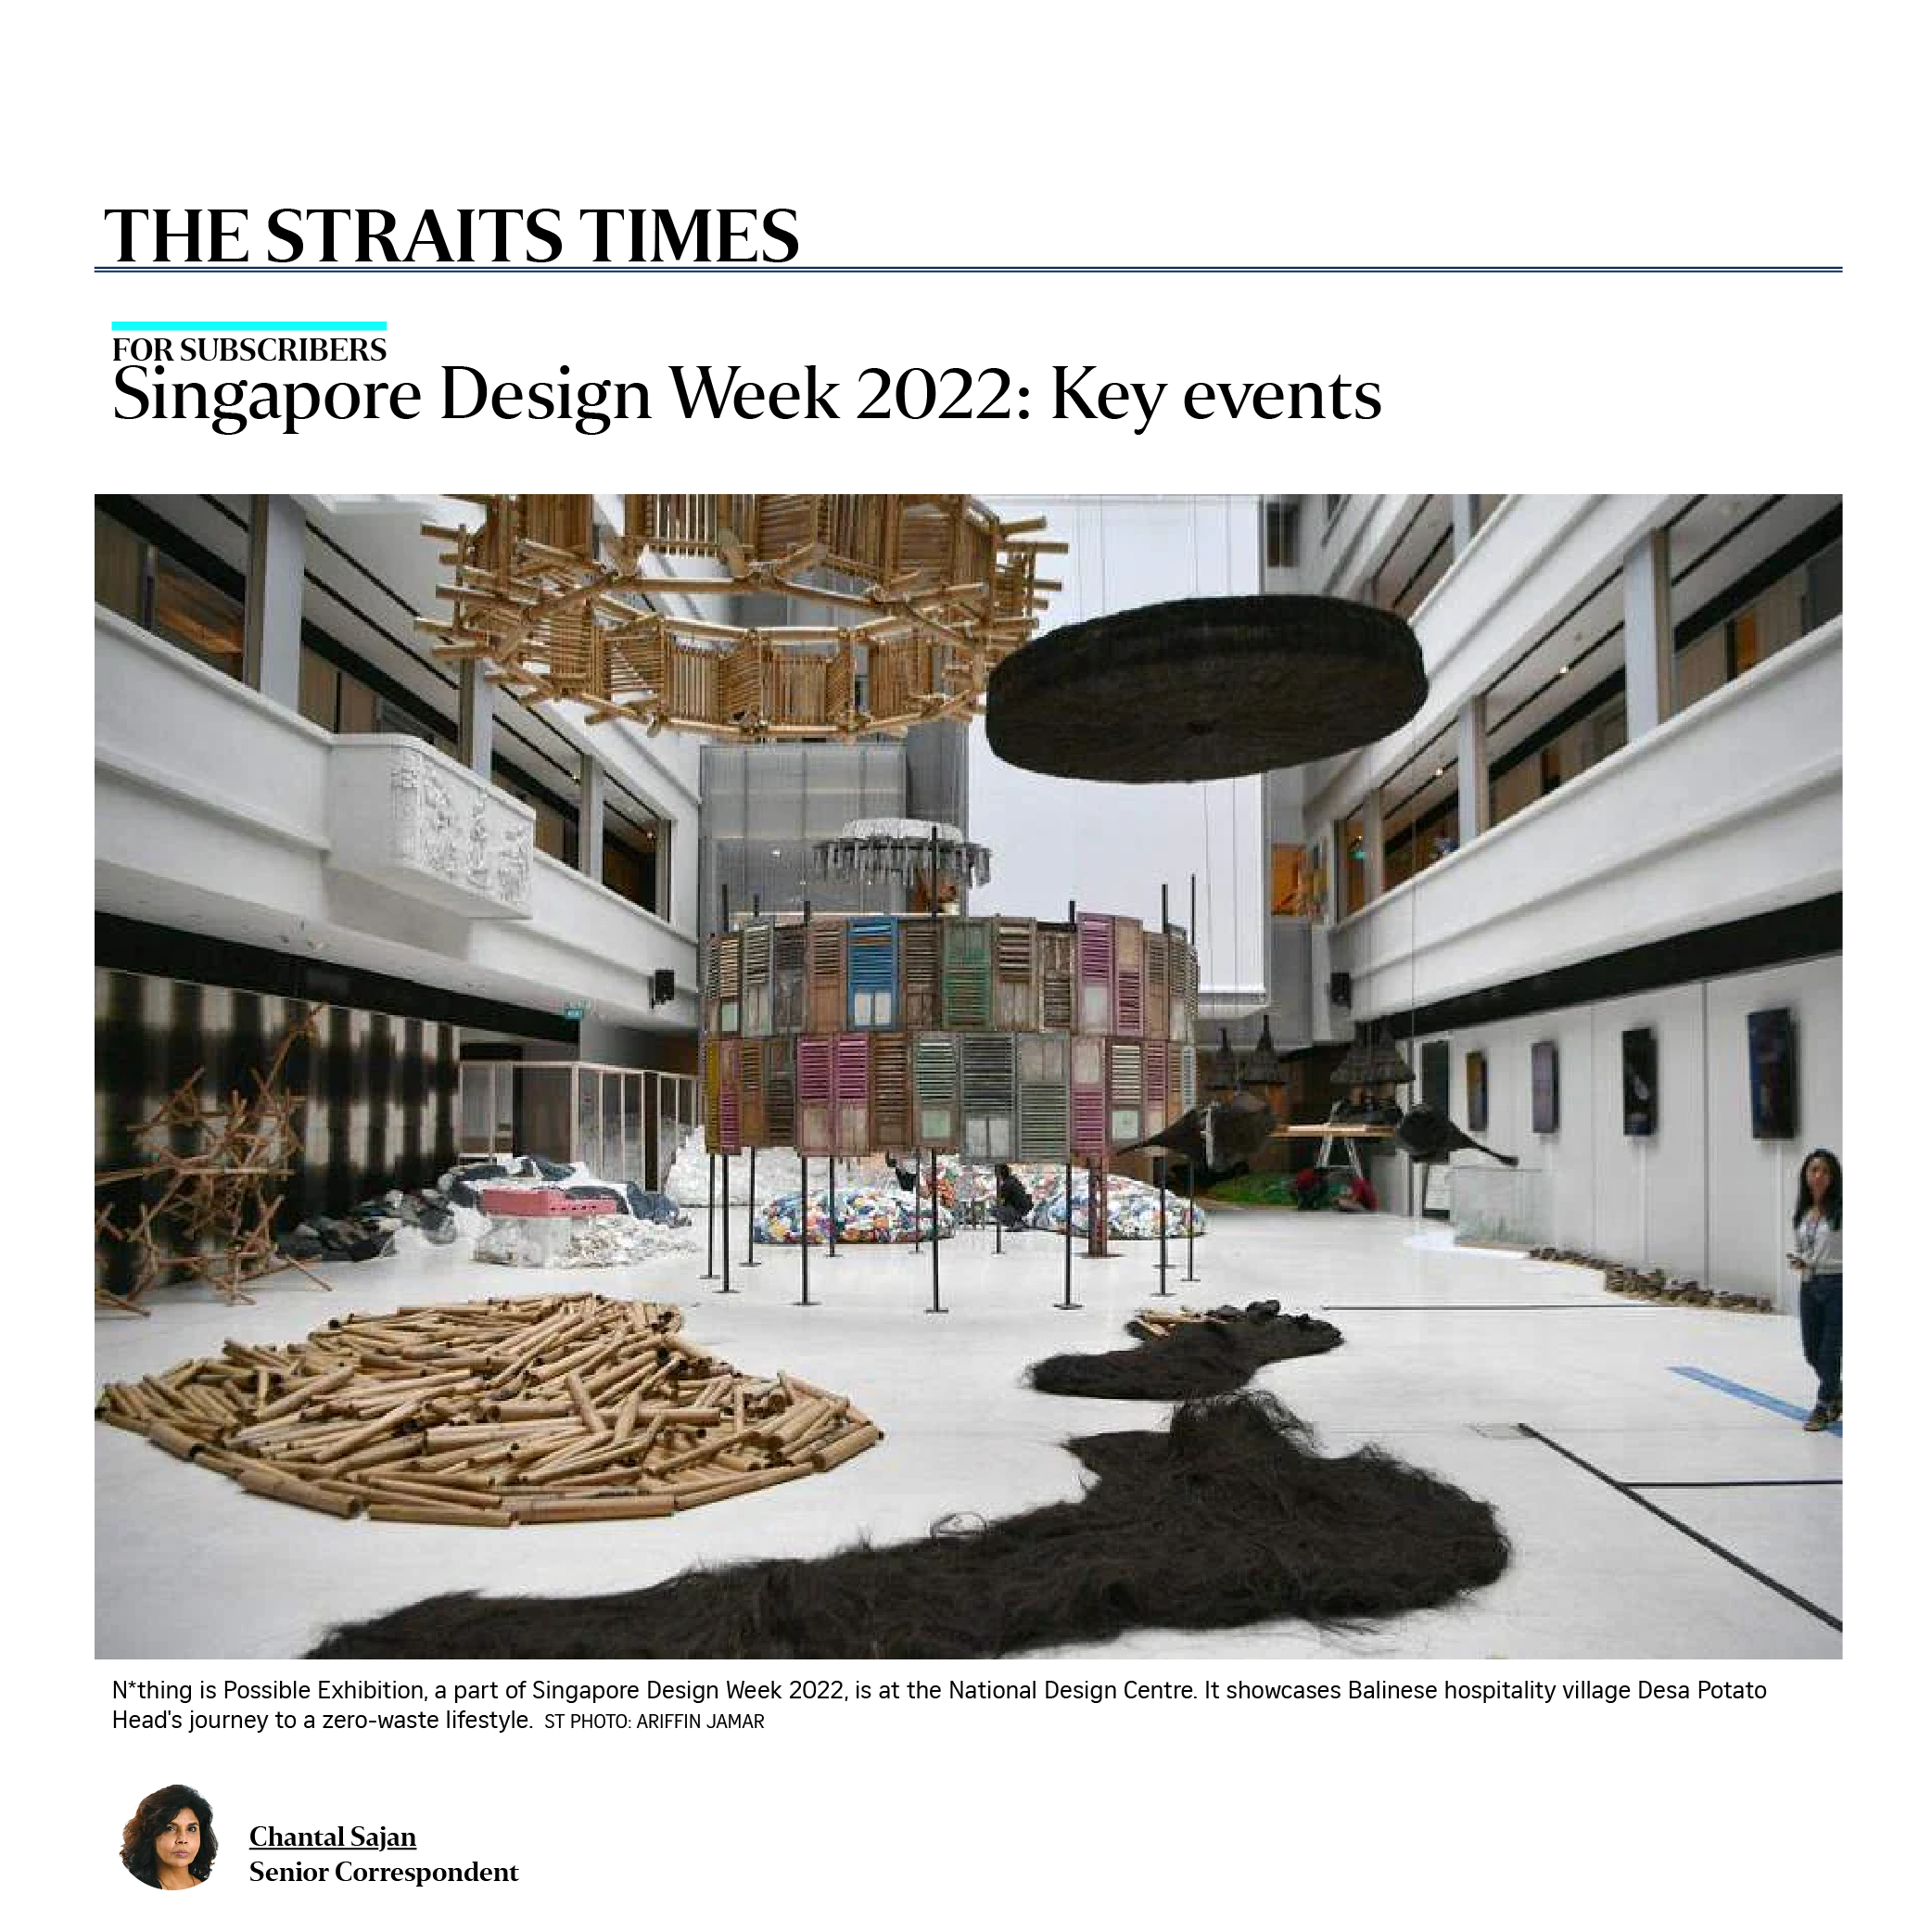 The Straits Times - Signapore Design Week 2022 - key events